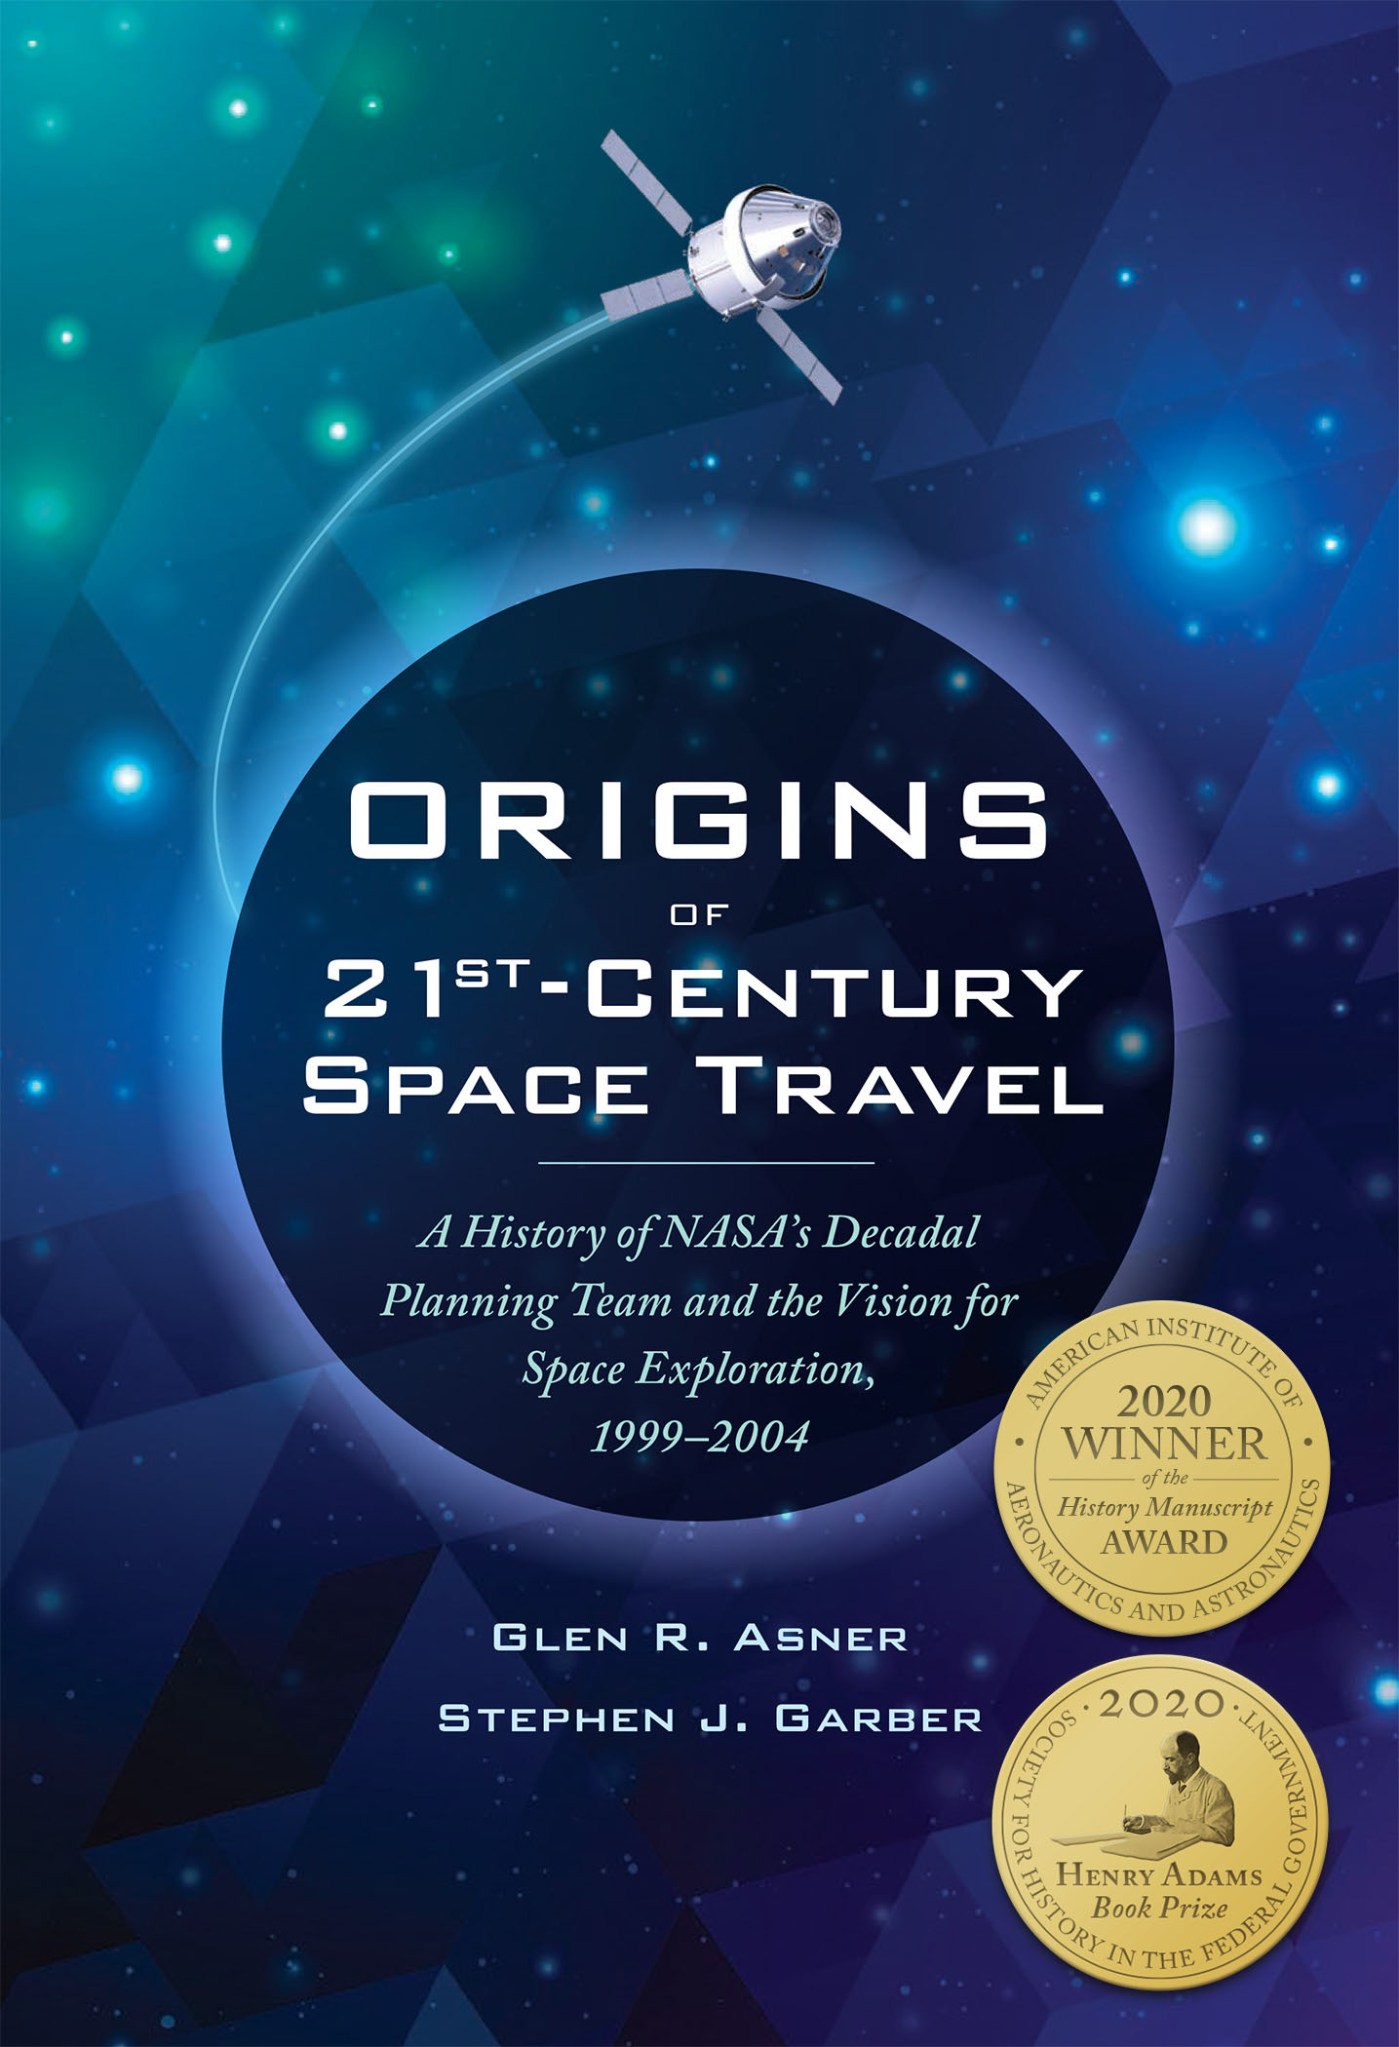 Cover design with 2 awards for Origins of 21st-Century Space Travel